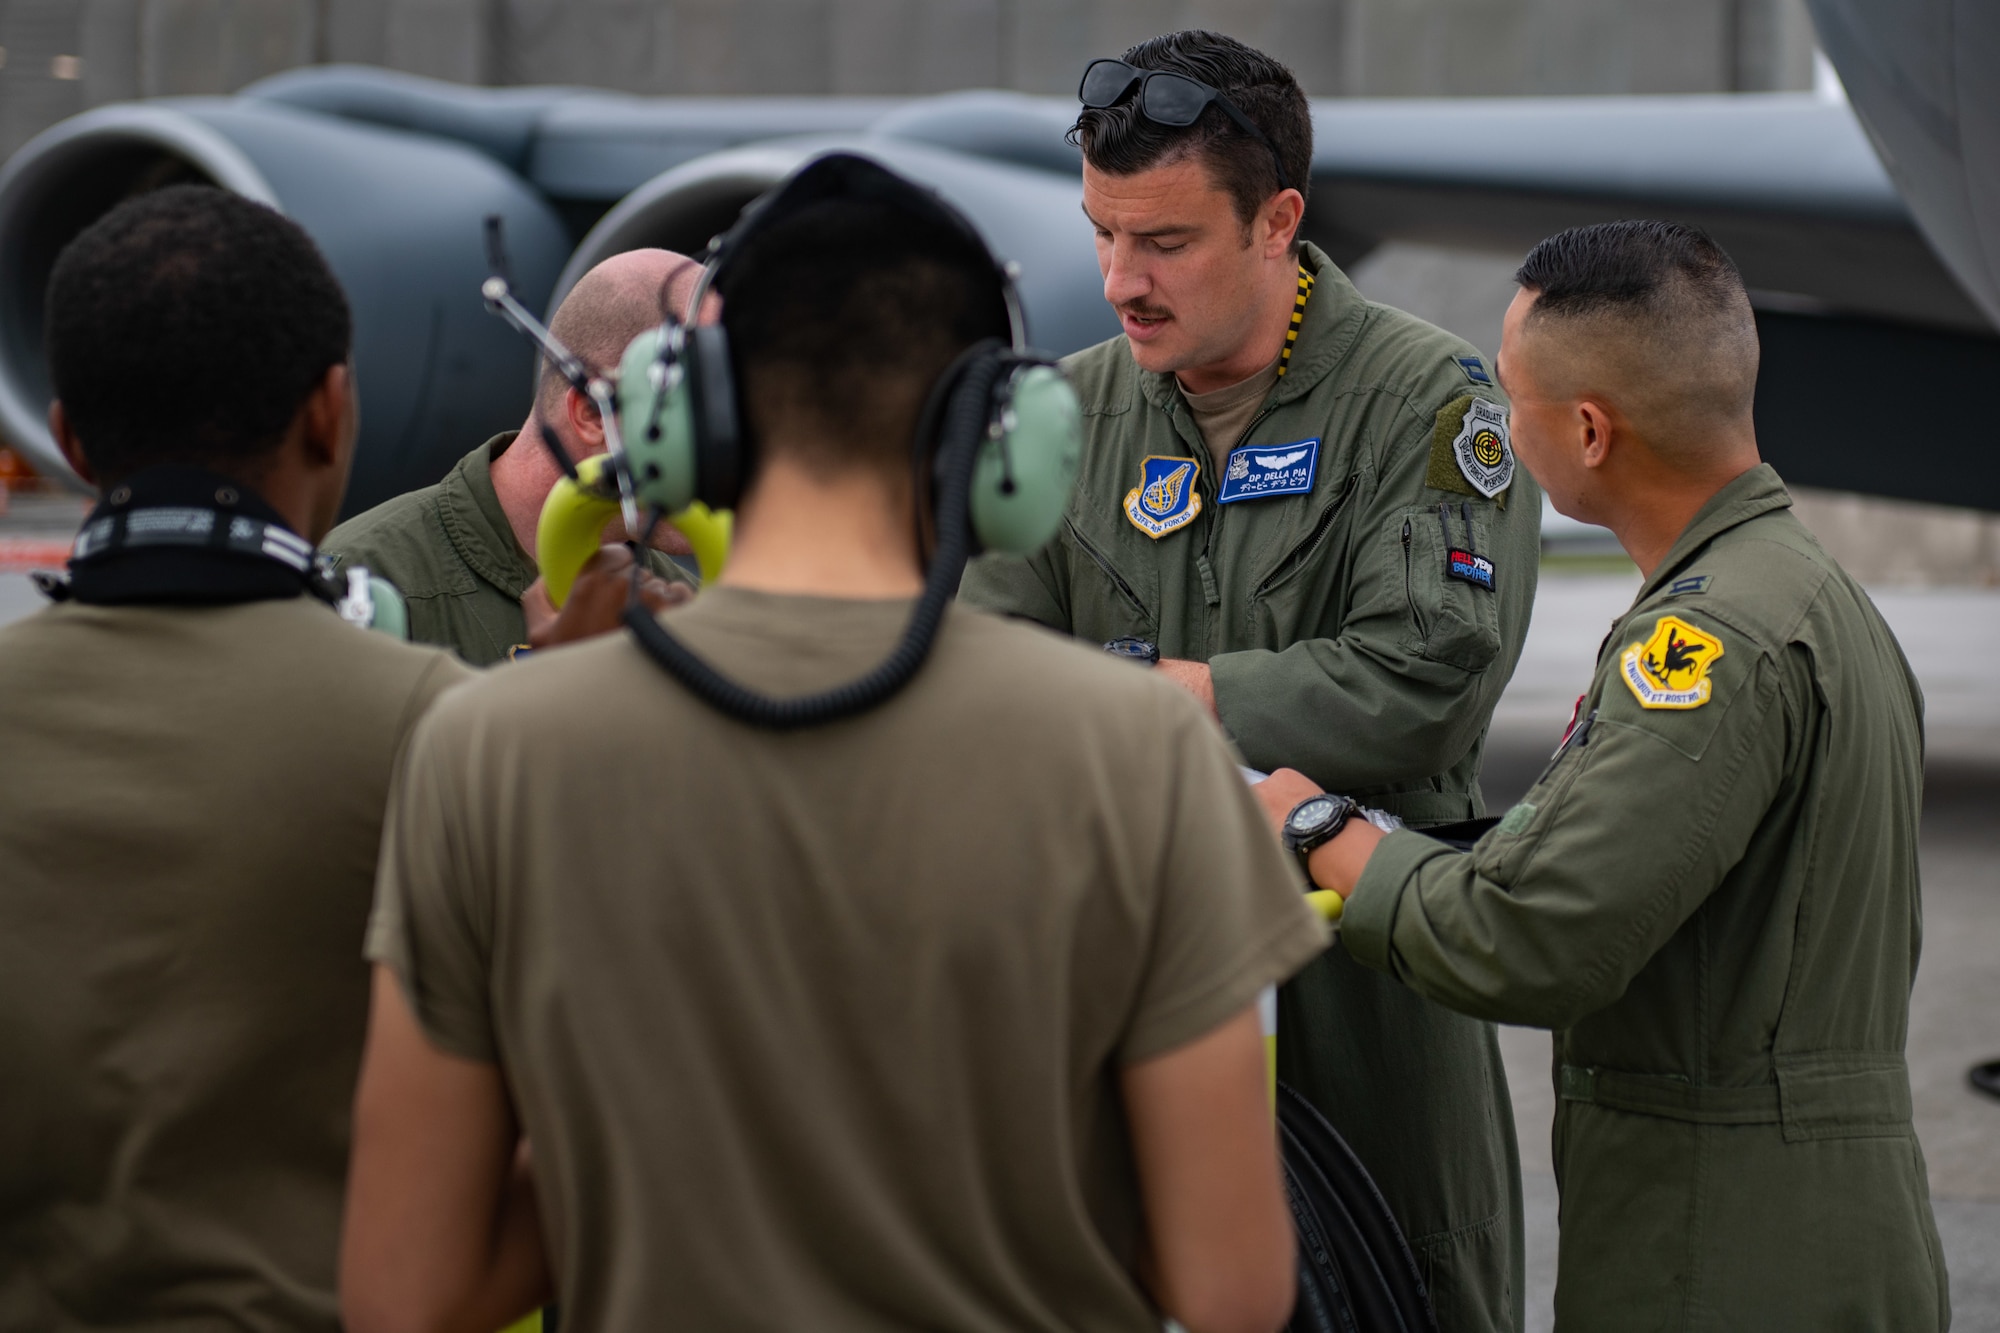 A group of airmen huddle up to discuss plans for the day